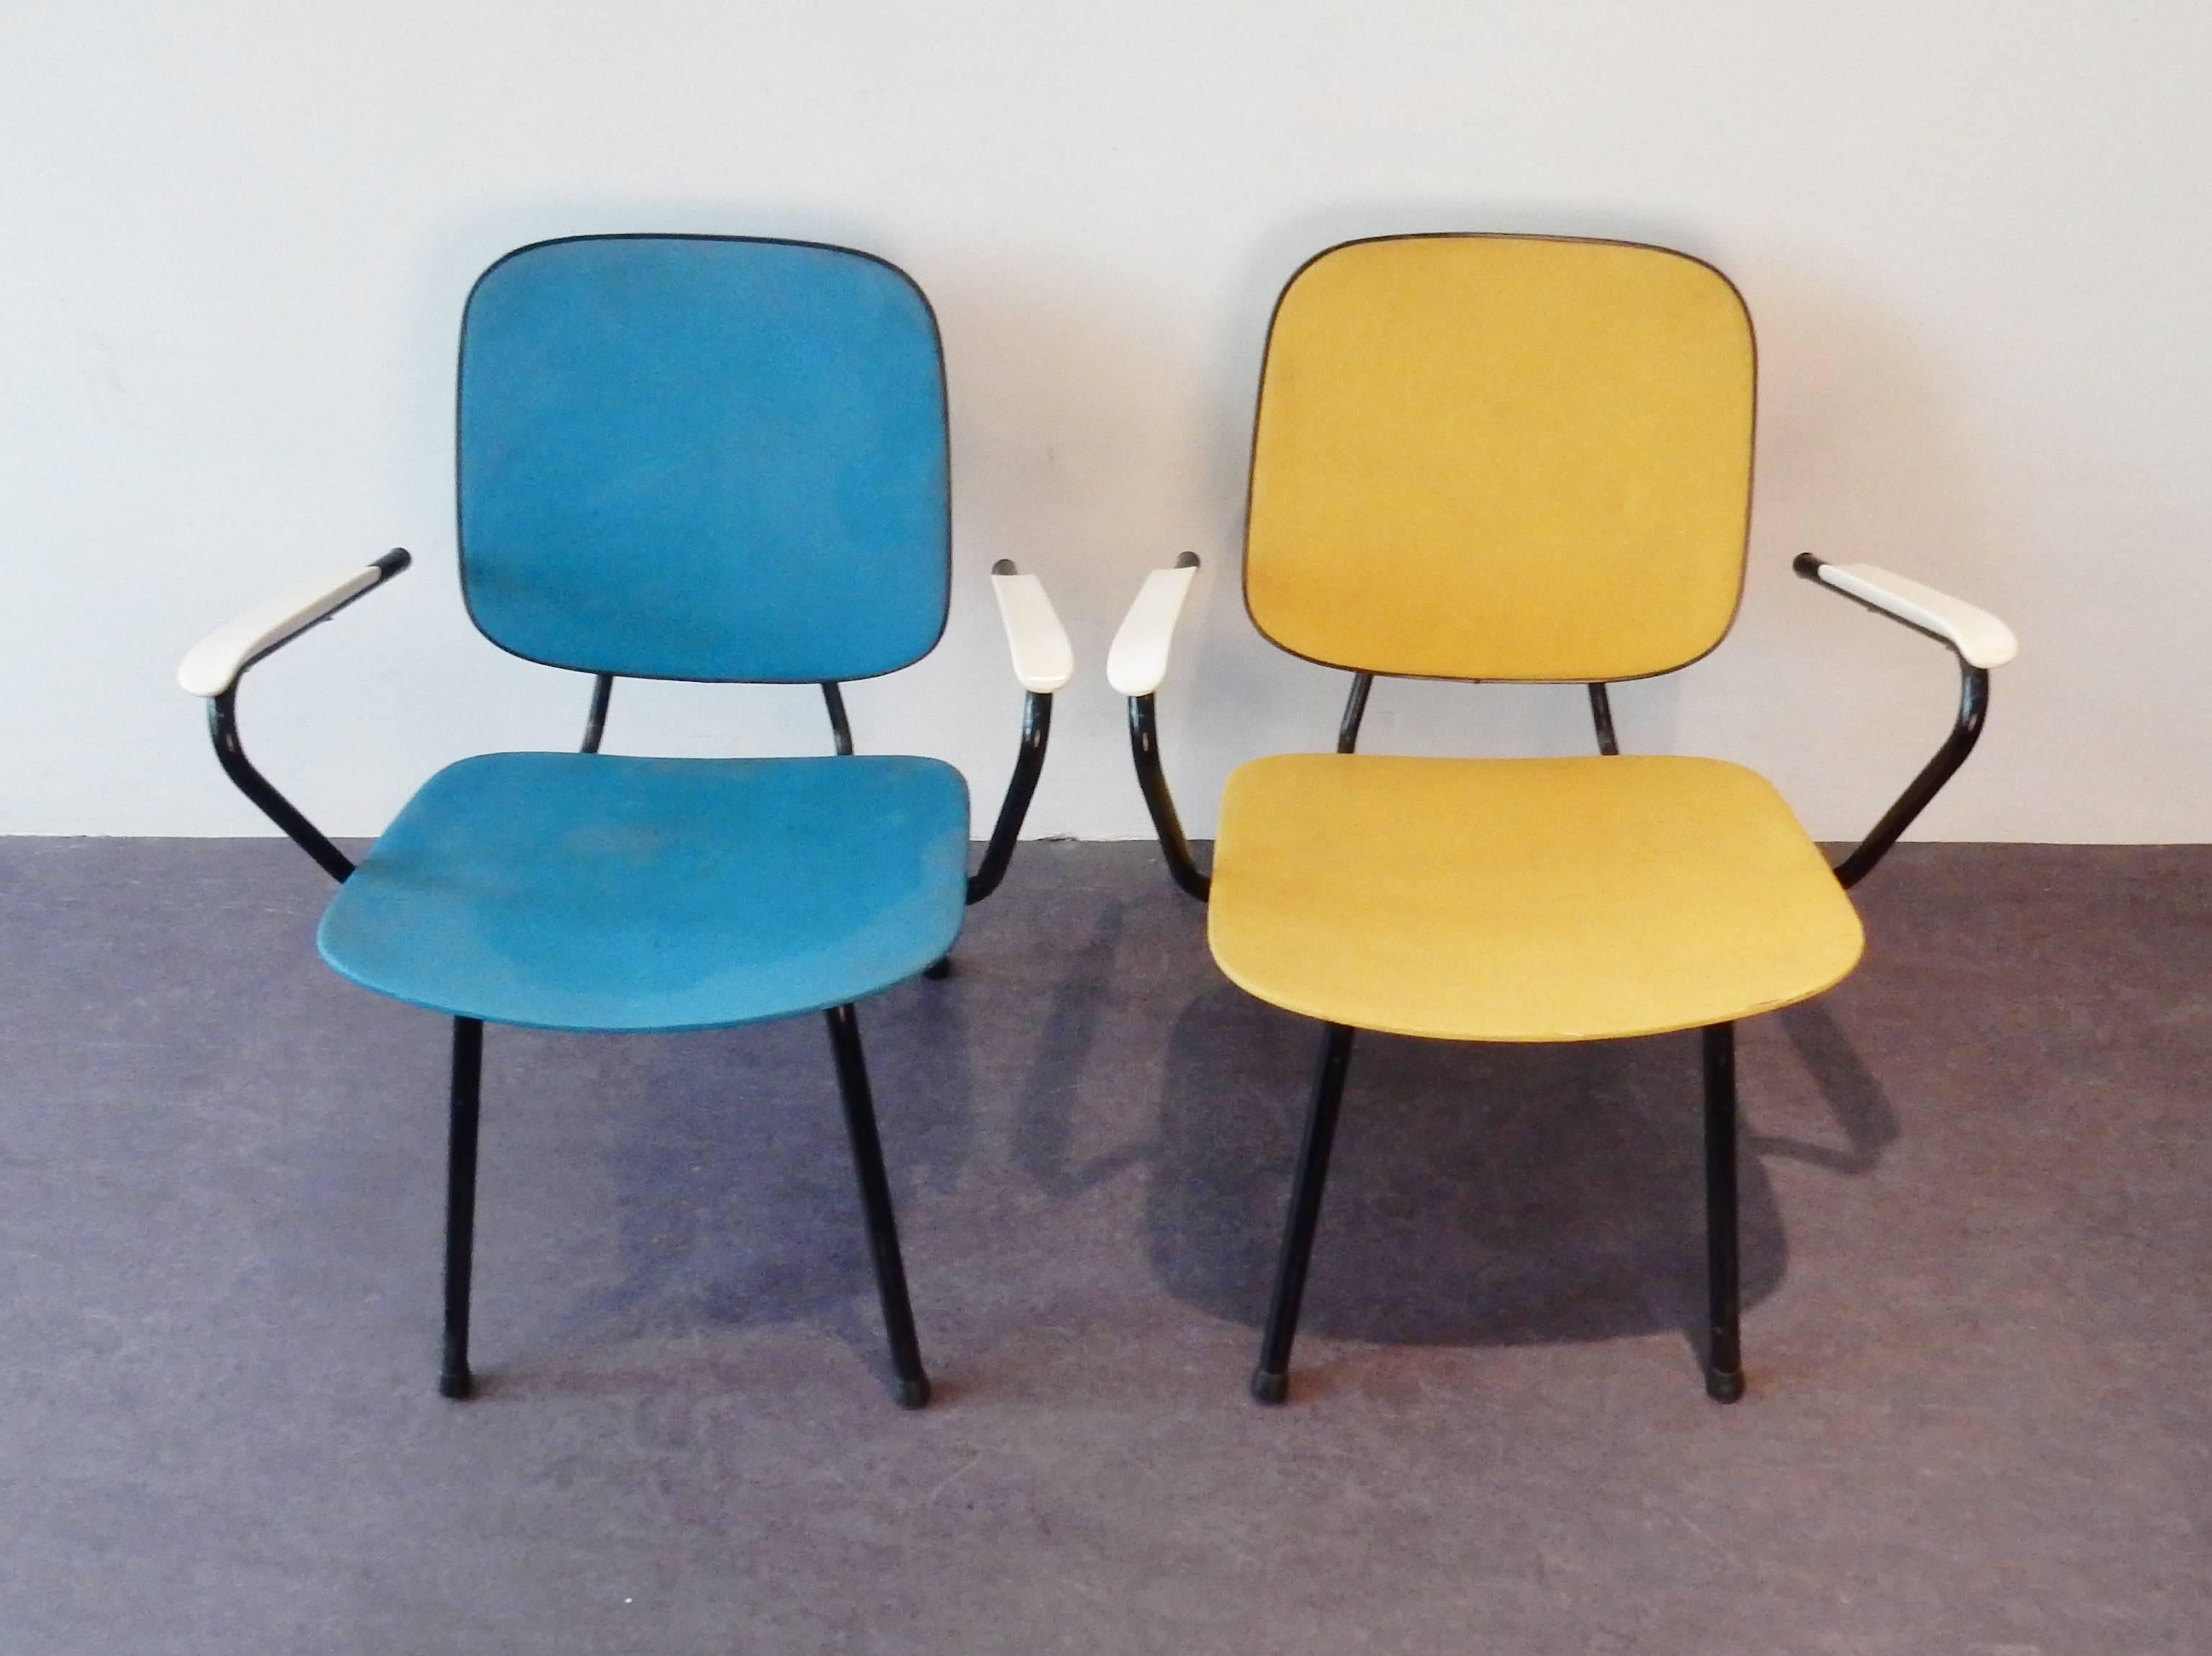 This is a set of two chairs that do not come by very often. To us the origin is unknown but the look and feel, with the sloping backrests, are similar to the 'F1' chair designs of Belgian designer Willy Van Der Meeren for Tubax or to some designs of